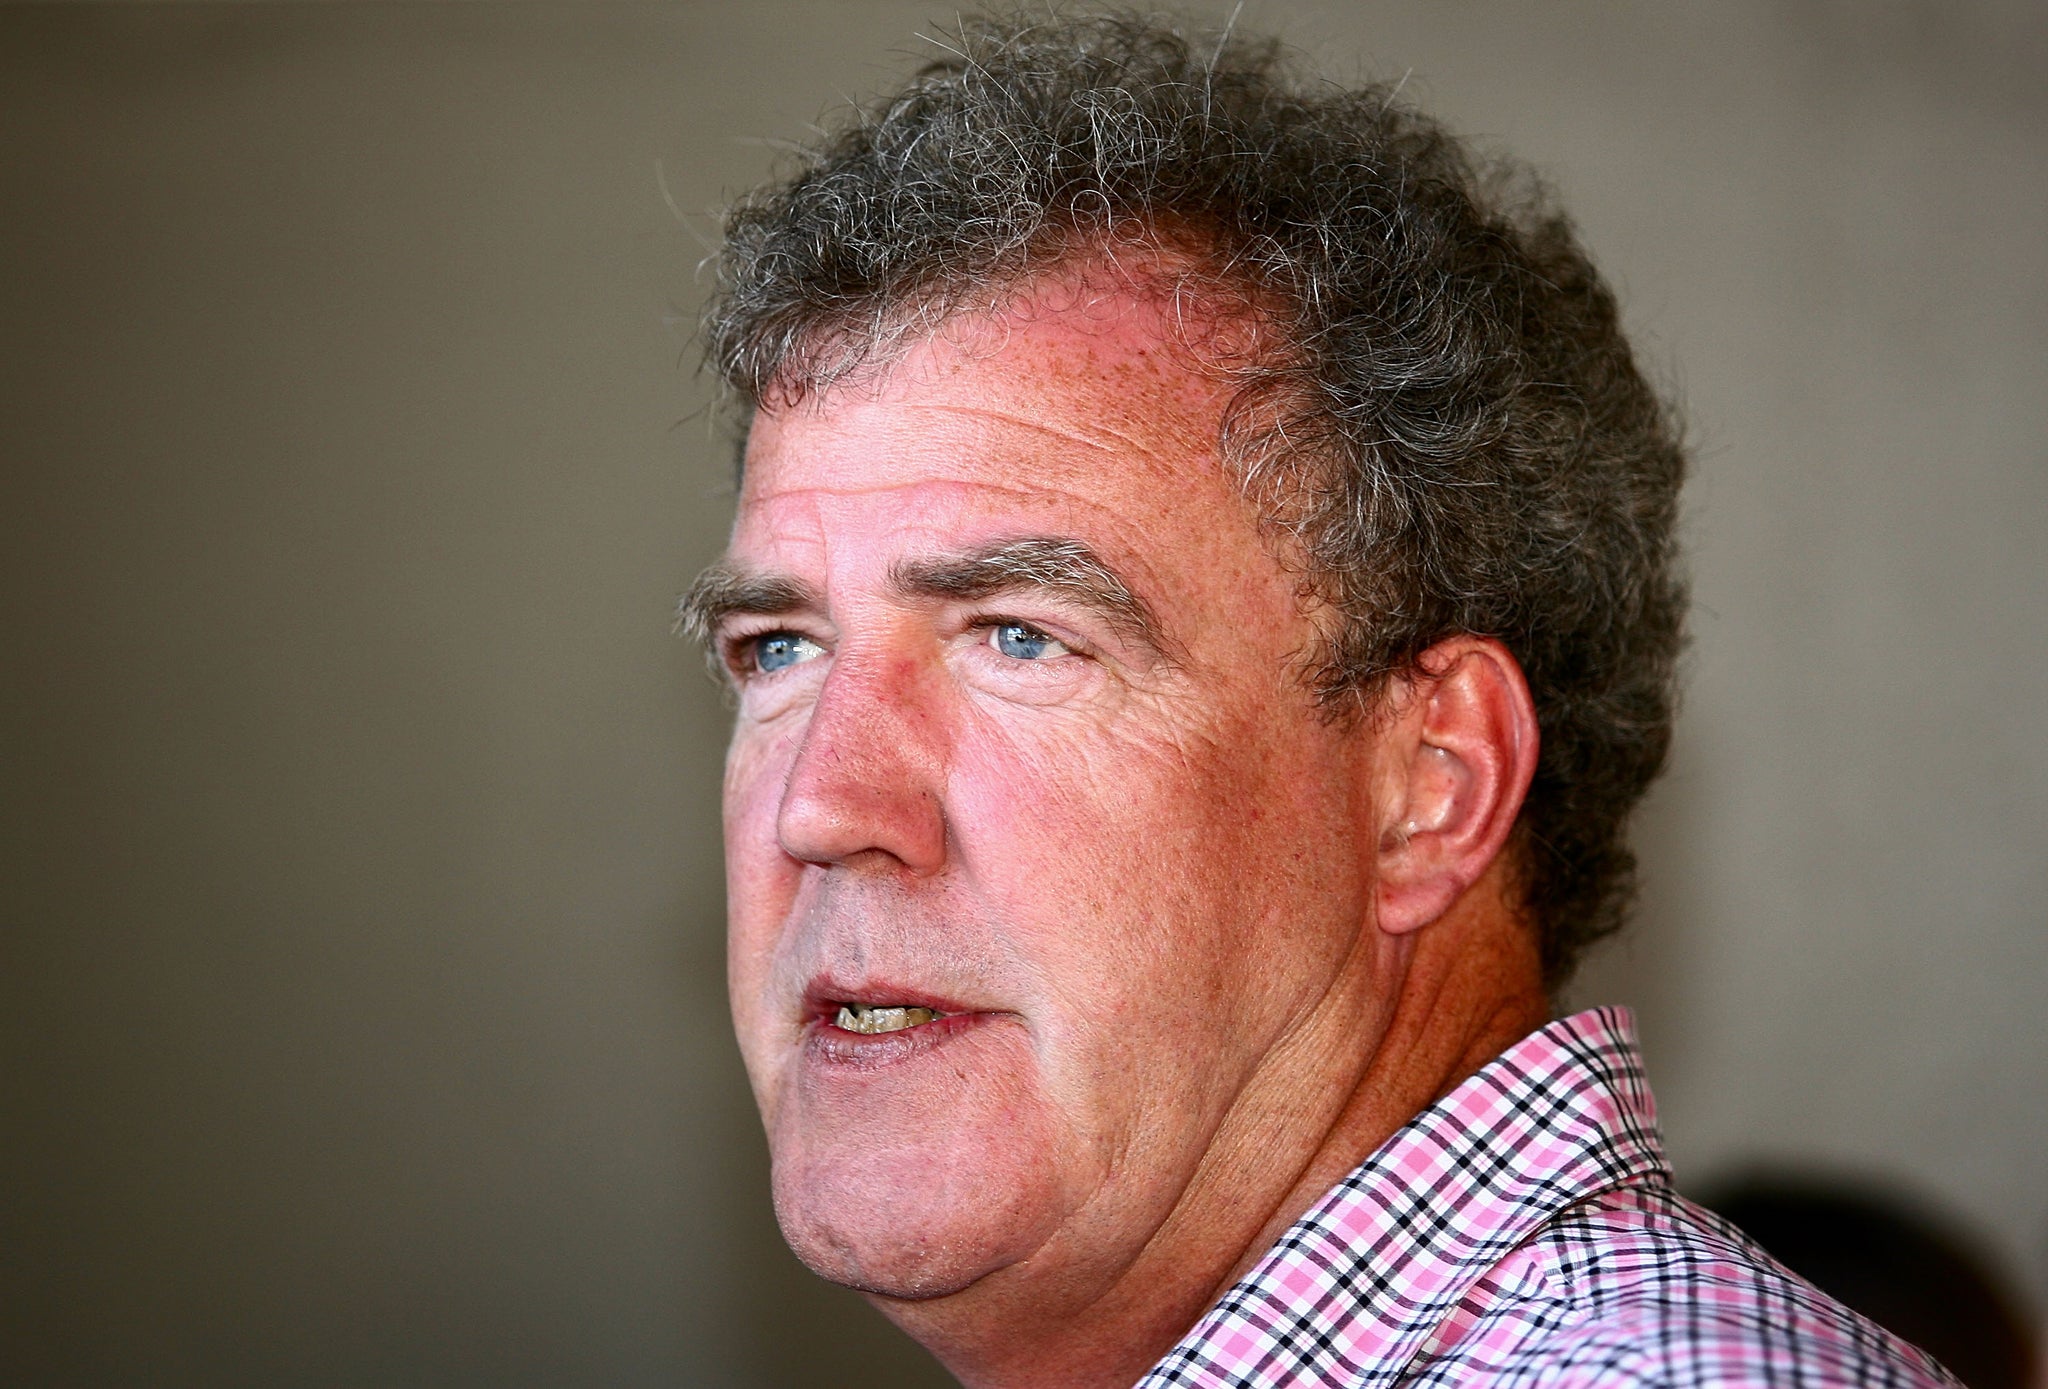 Jeremy Clarkson was axed from Top Gear after a 'fracas' with a producer